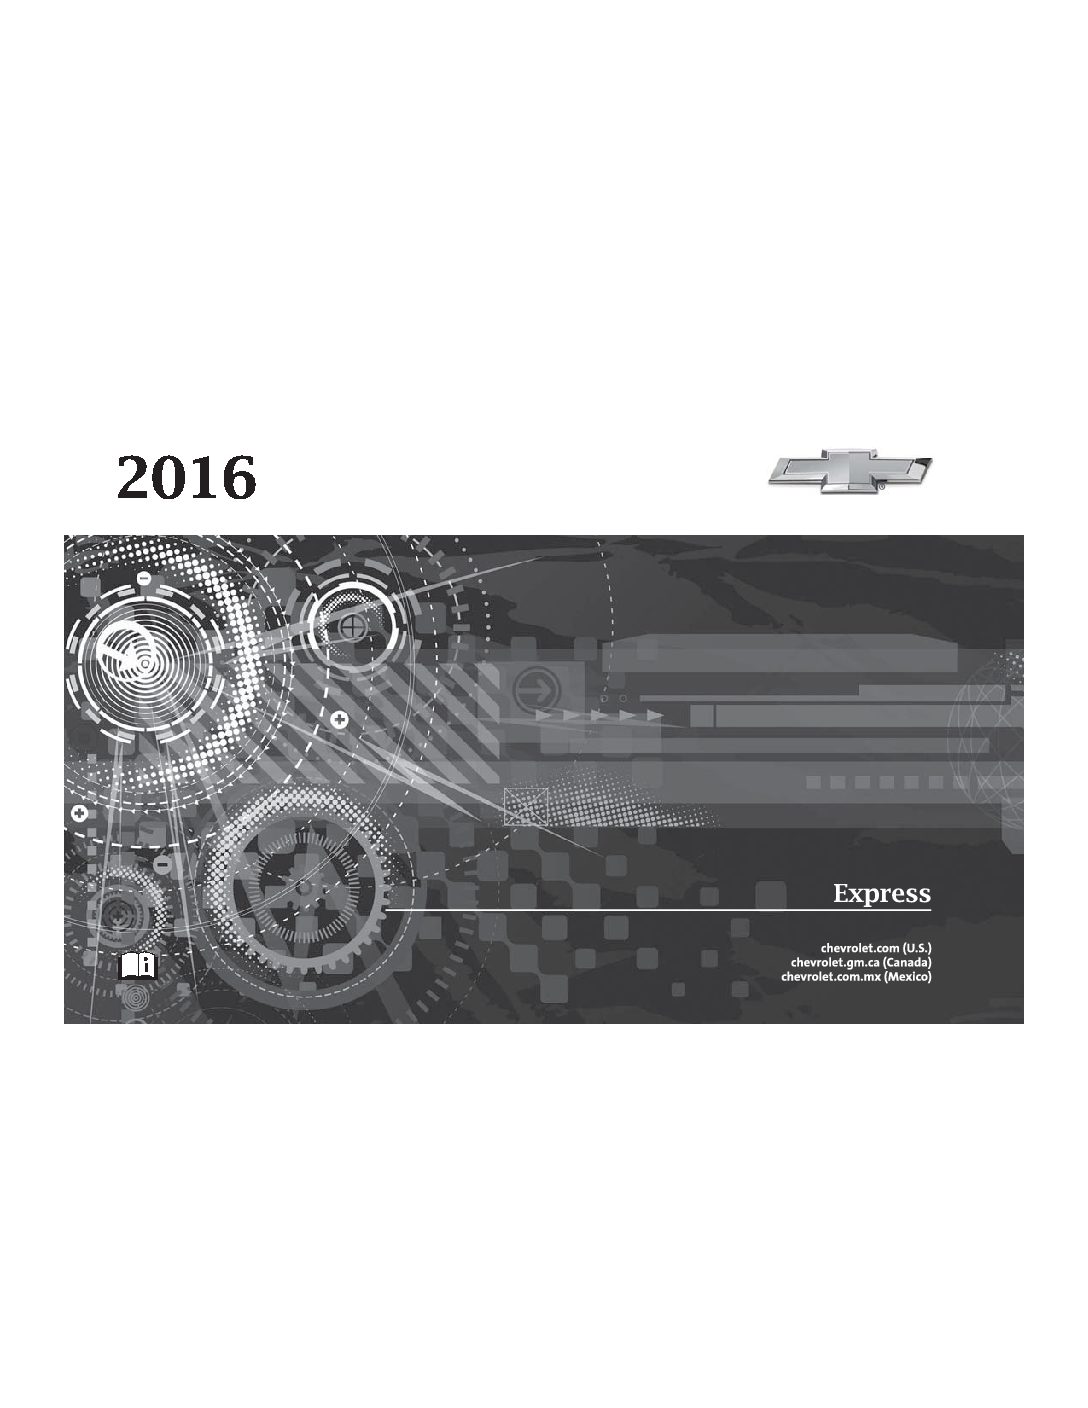 2016 Chevrolet Express Owner’s Manual Image